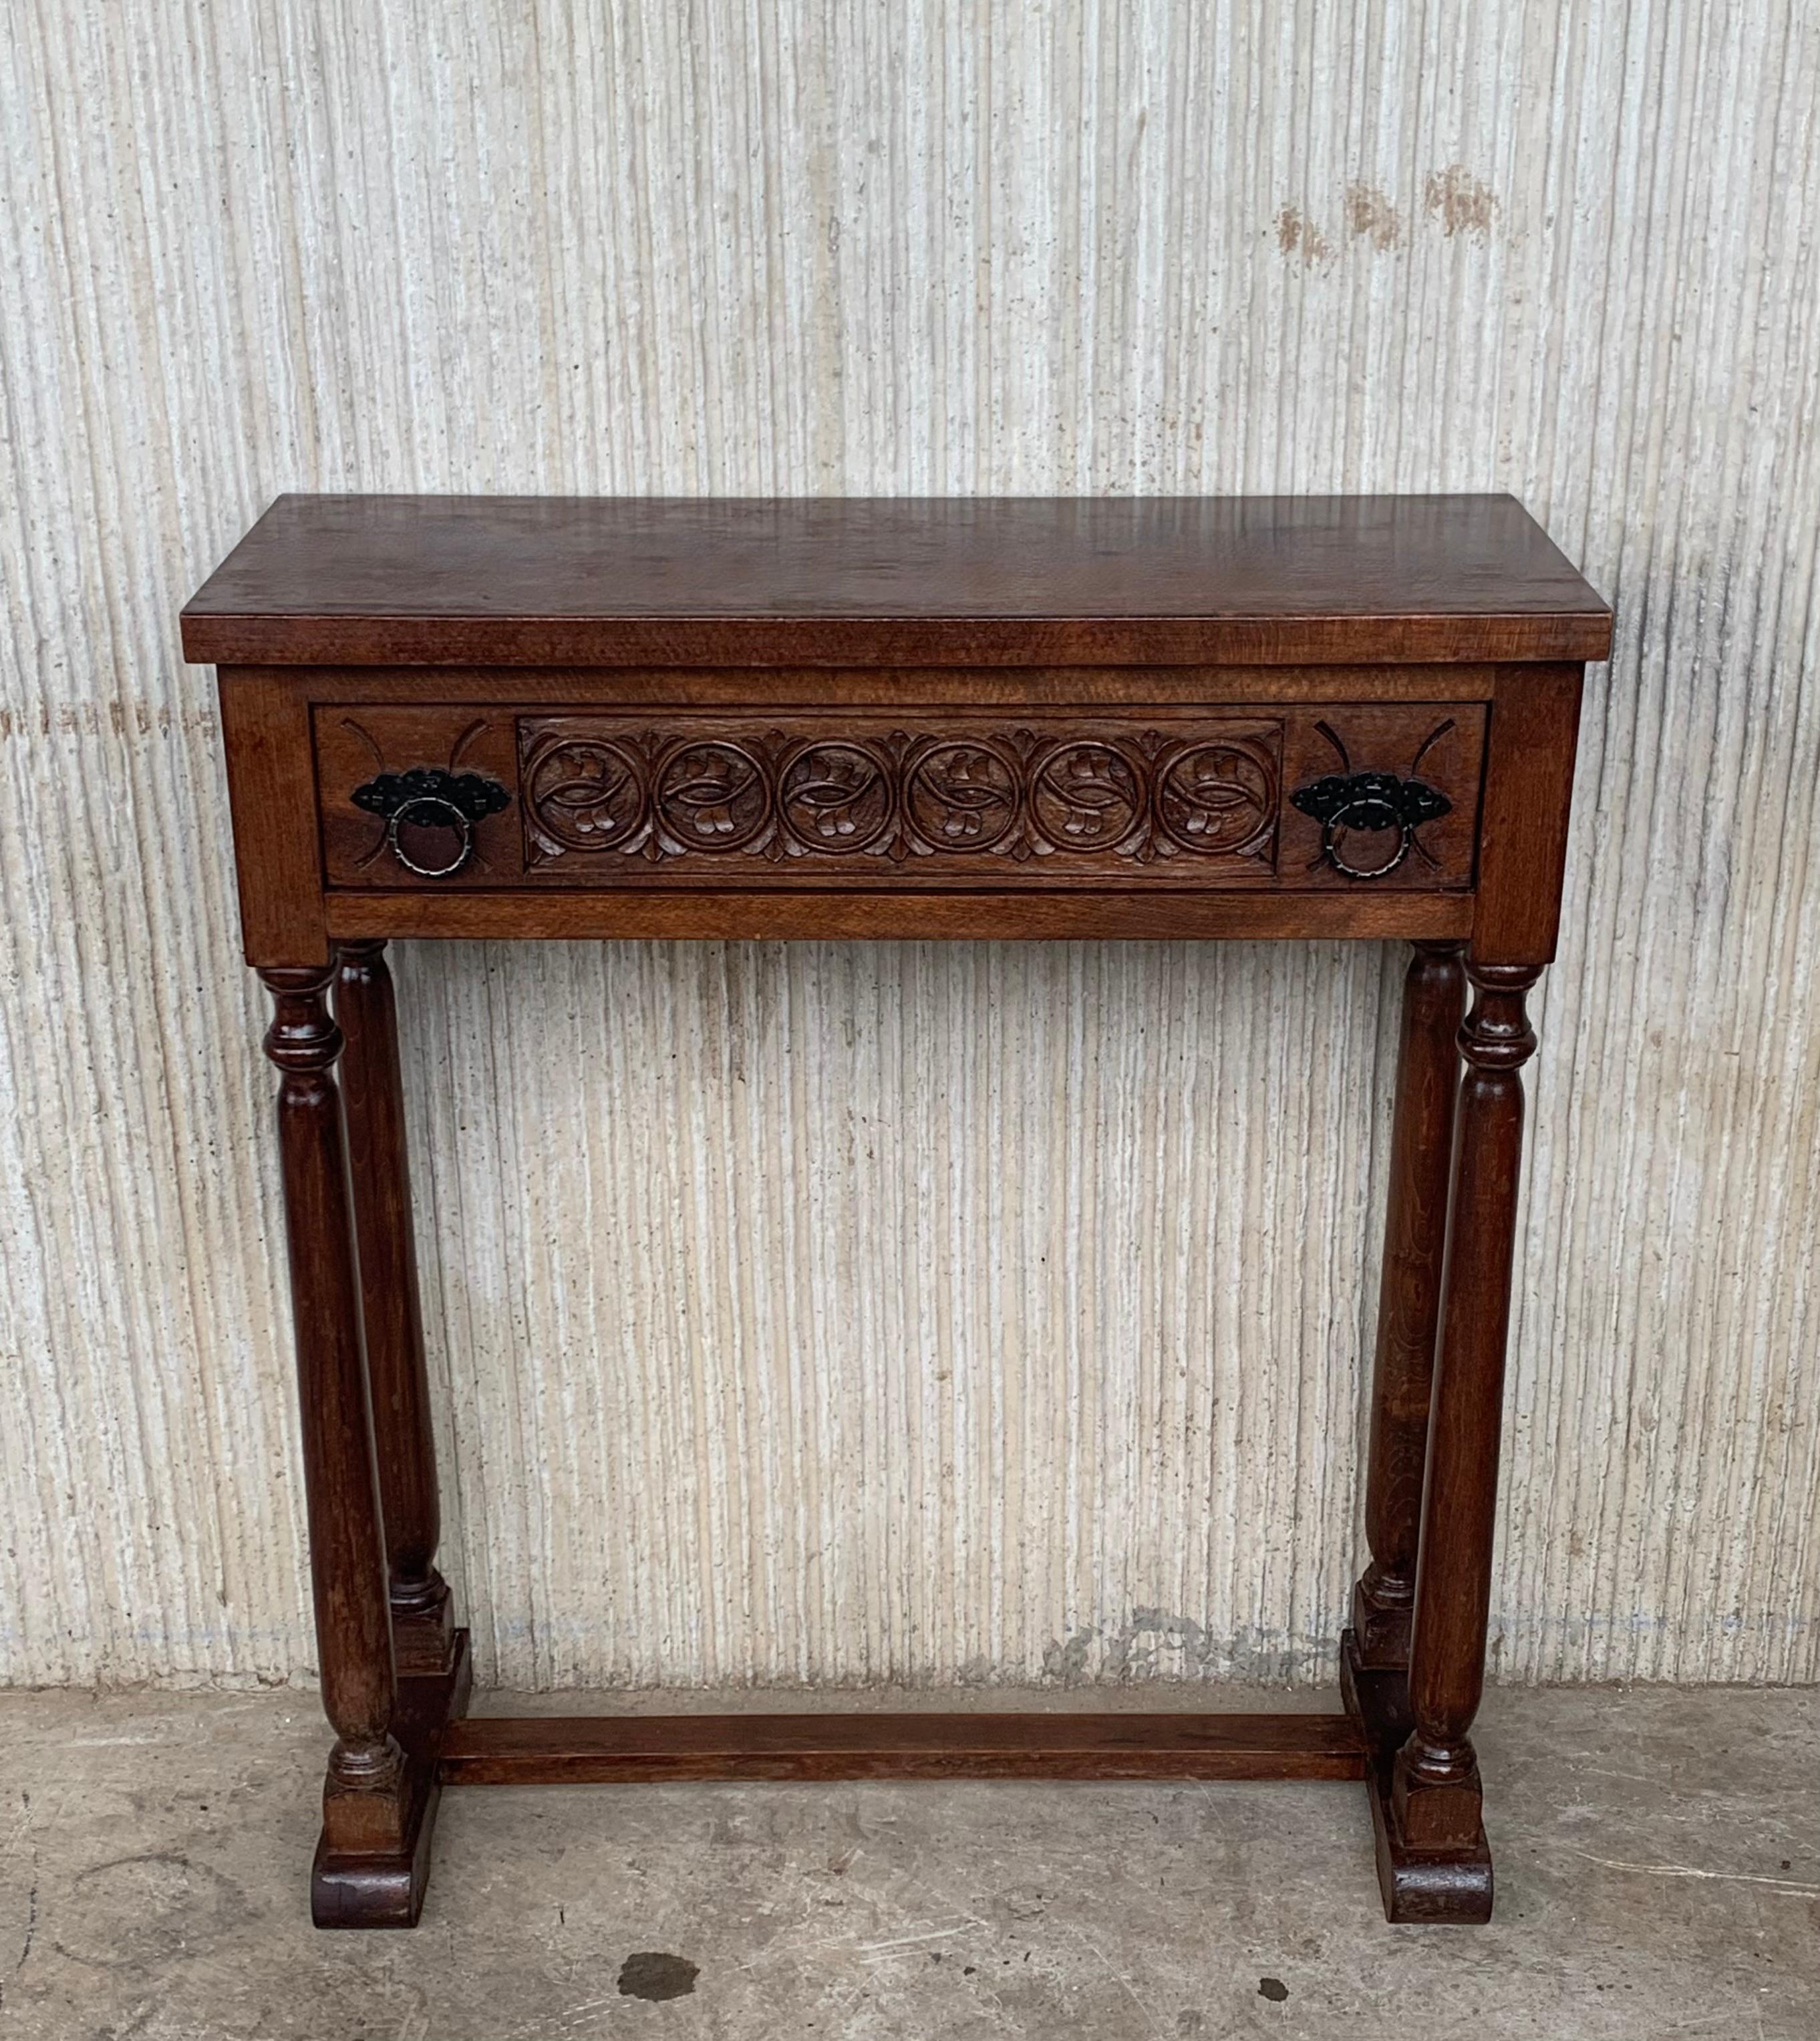 Baroque 20th Century Spanish Little Console Table with One Drawer and Turned Legs